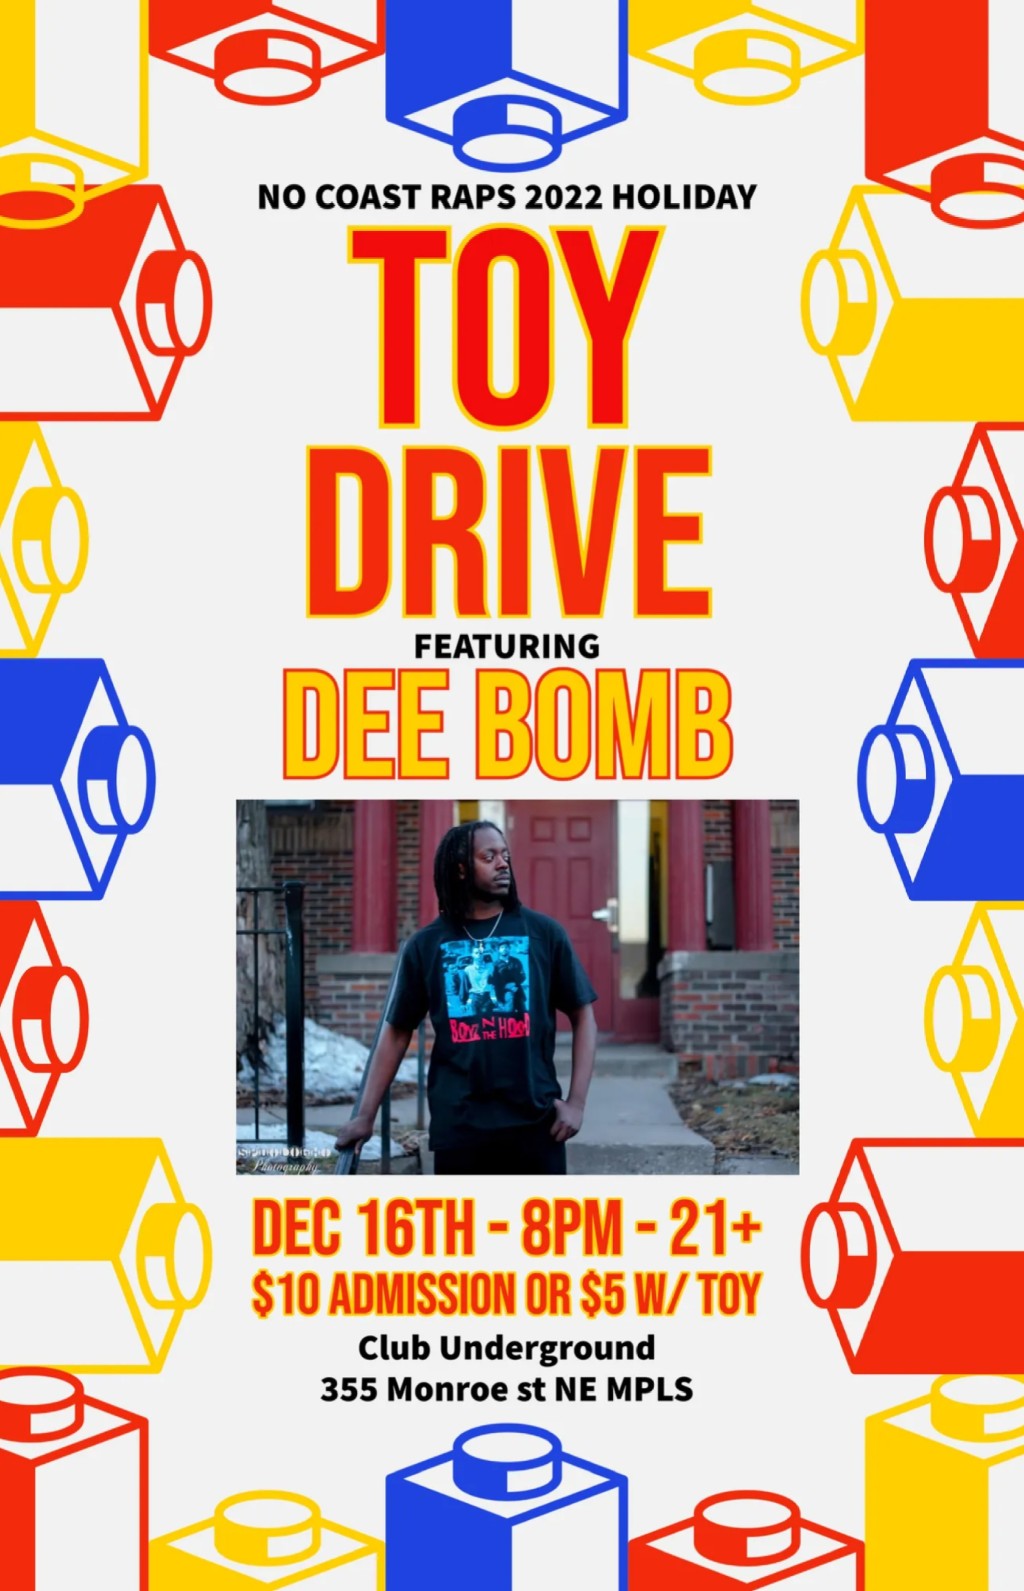 Dee Bomb Performing for the 2022 Toy Drive